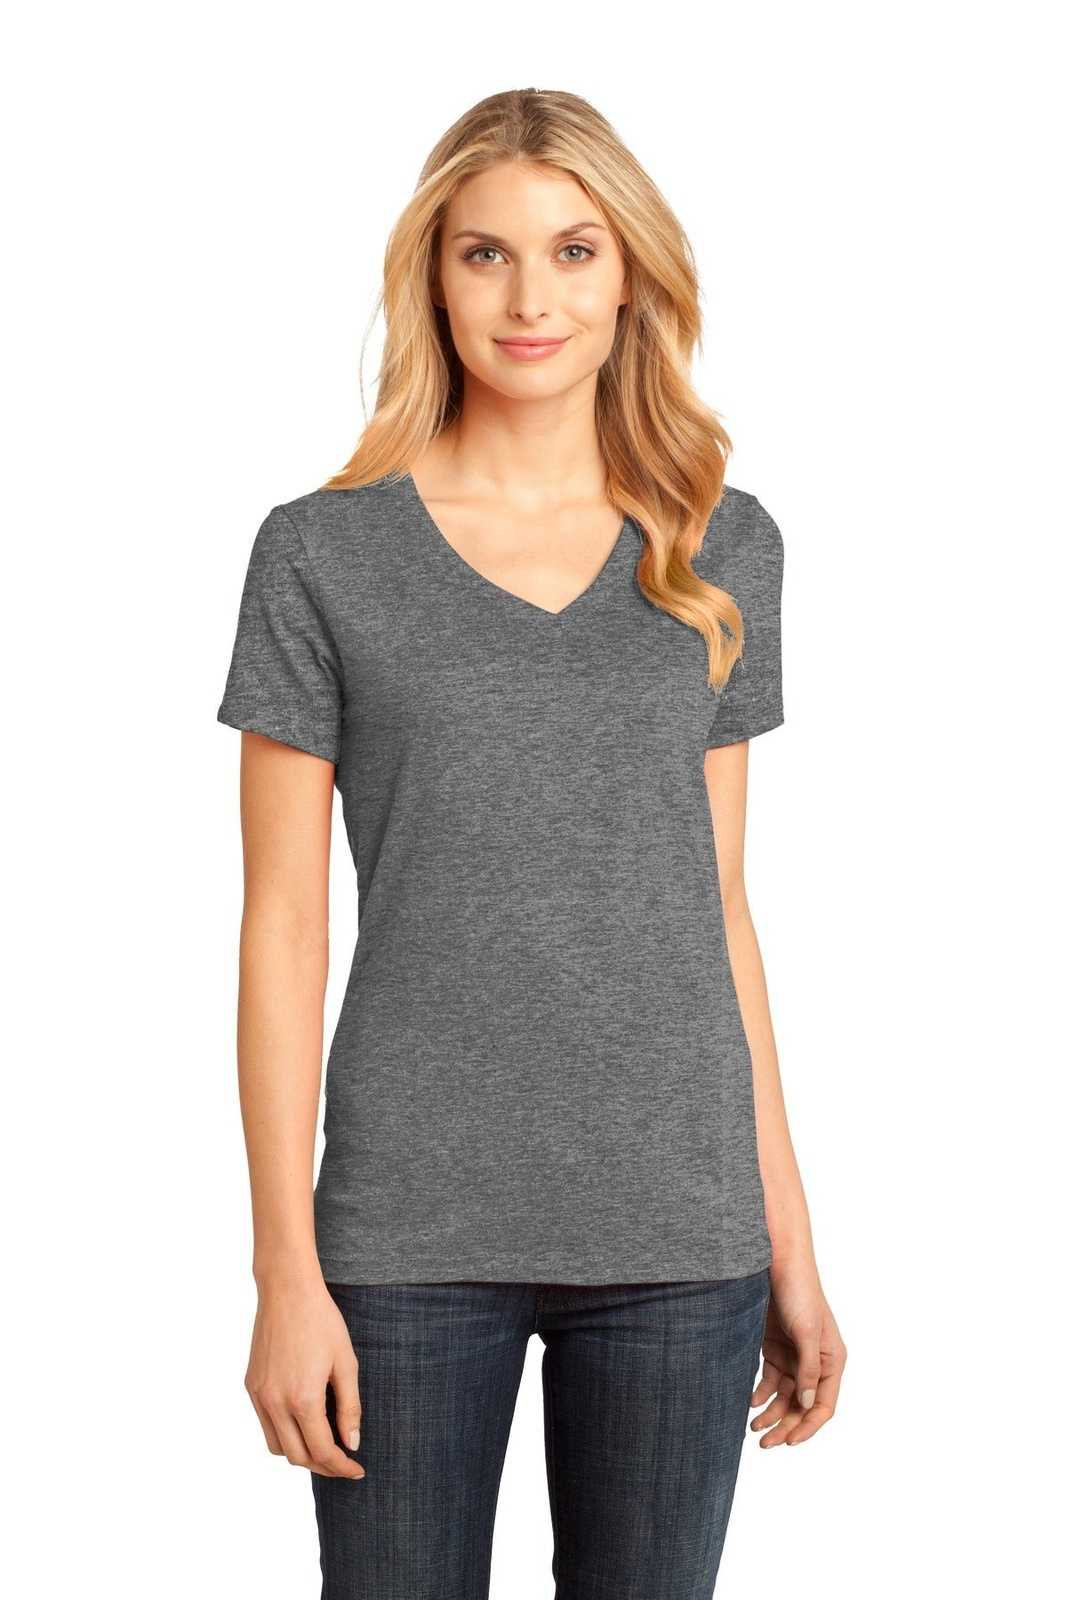 District DM1170L Women's Perfect Weight V-Neck Tee - Heathered Nickel - HIT a Double - 1